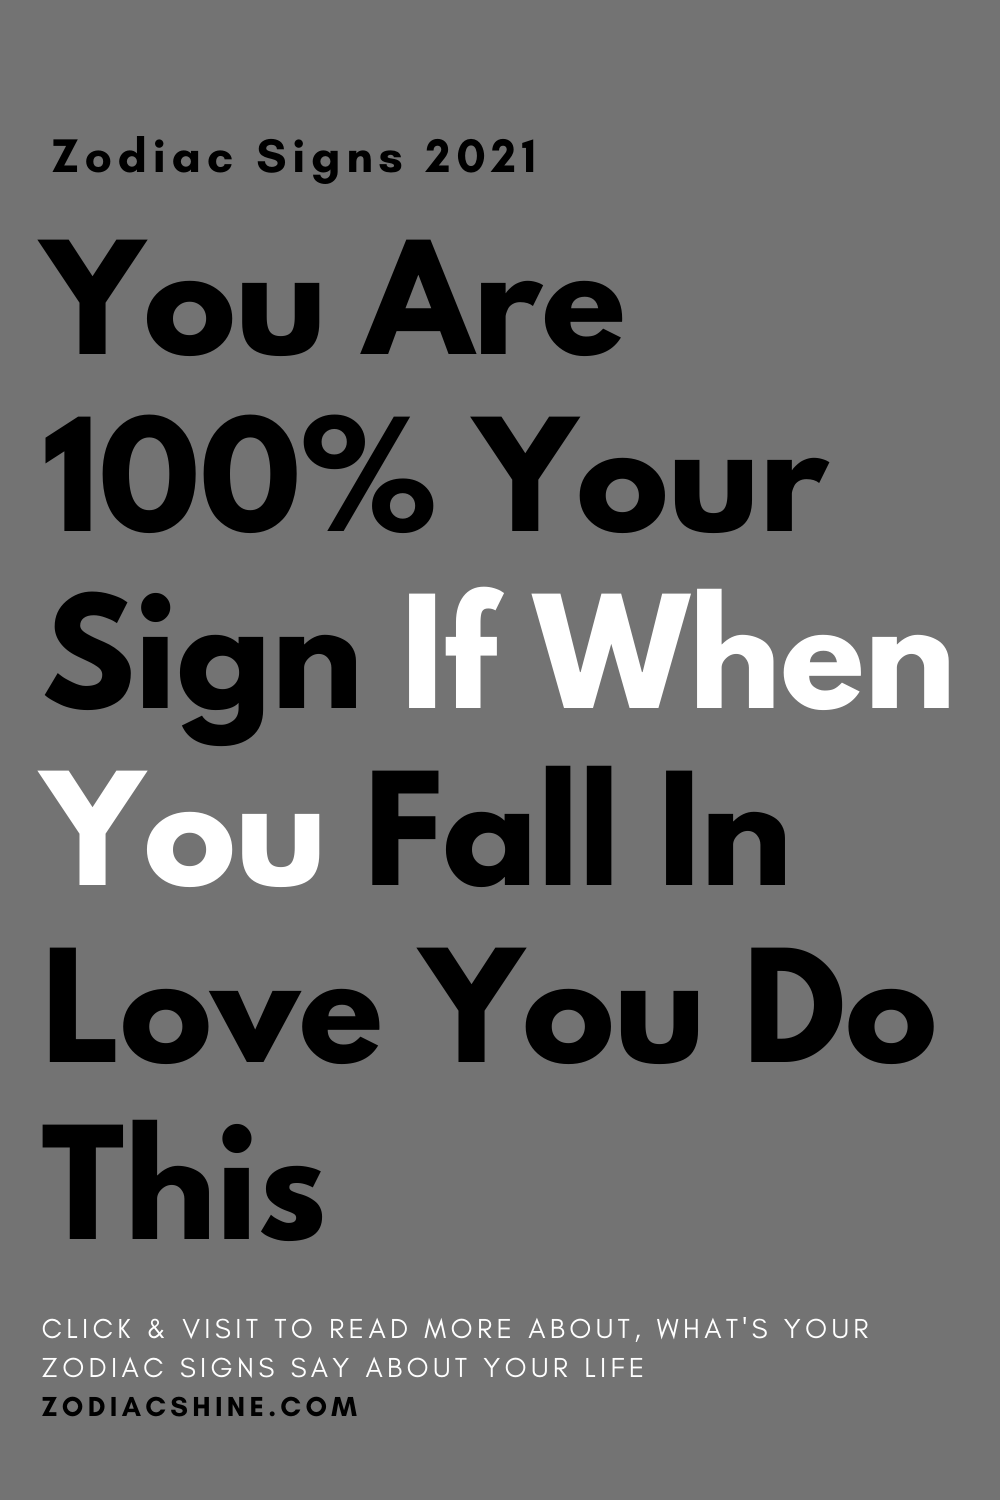 You Are 100% Your Sign If When You Fall In Love You Do This